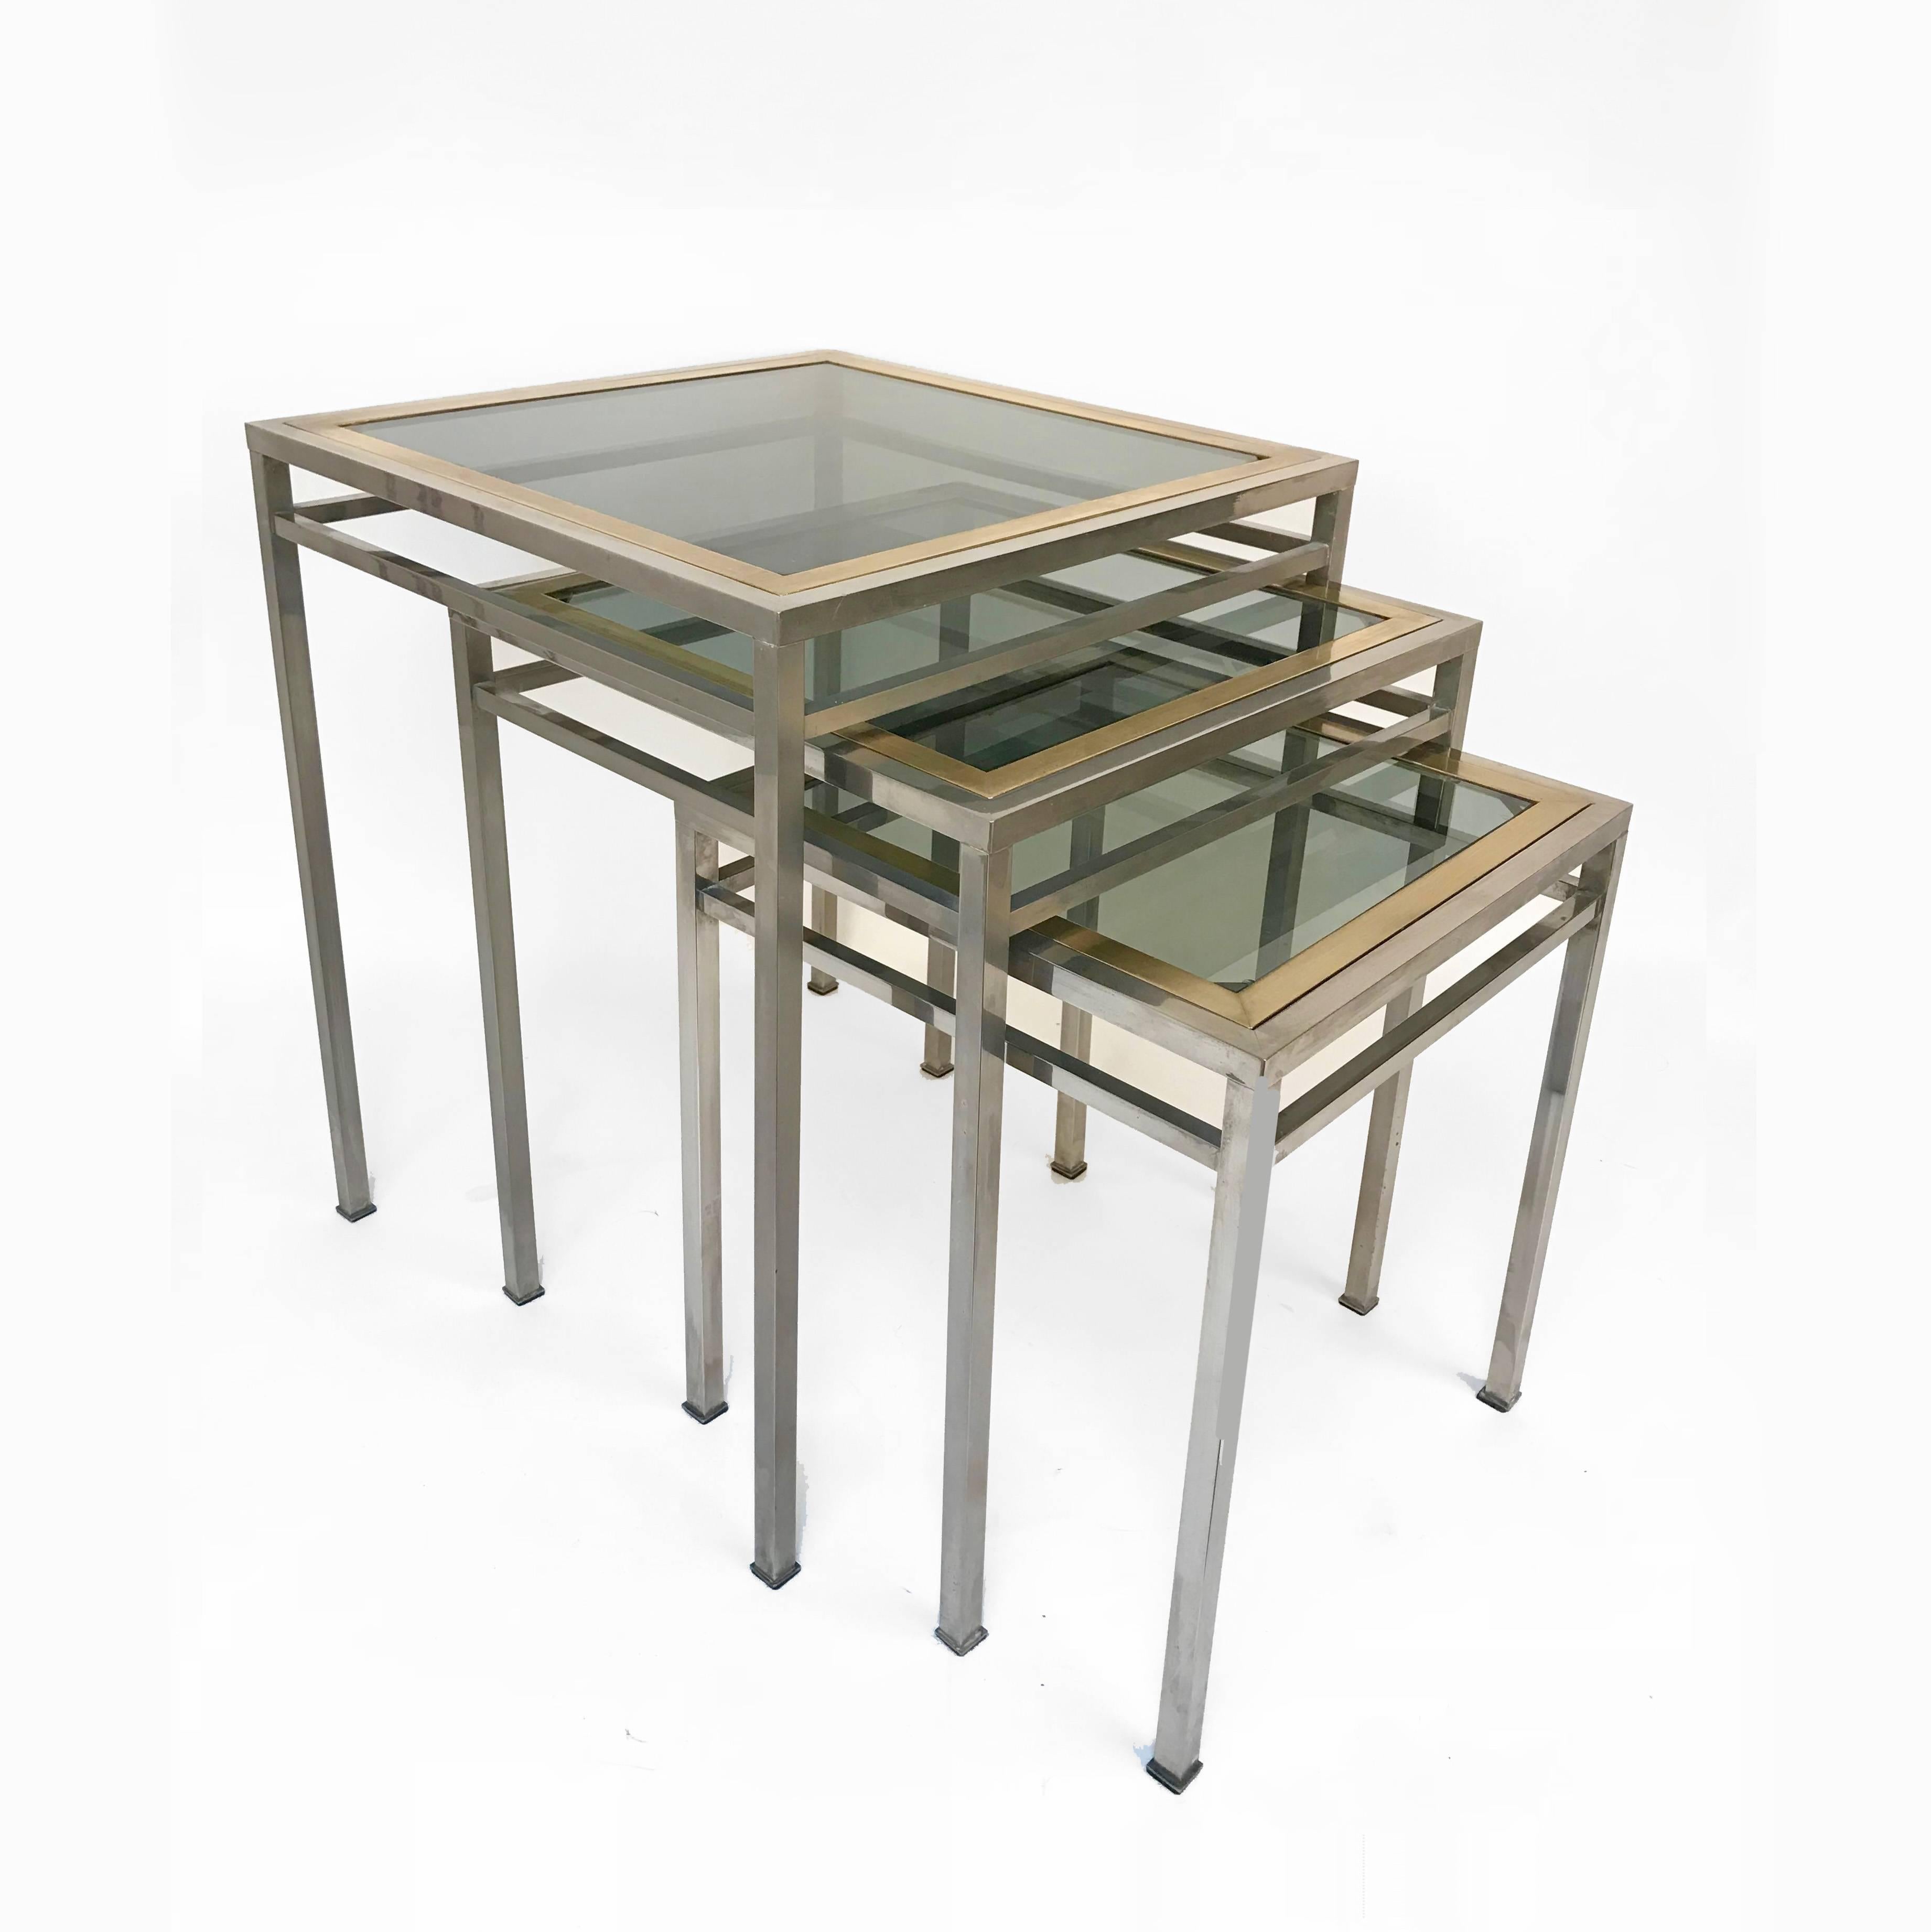 Three wonderful nesting tables in brass and crystal glass. They were produced in Italy during the 1970s.

These three tables are an iconic example of Mid-Century Modern lines and material, with the perfect integration of the smoked glass with